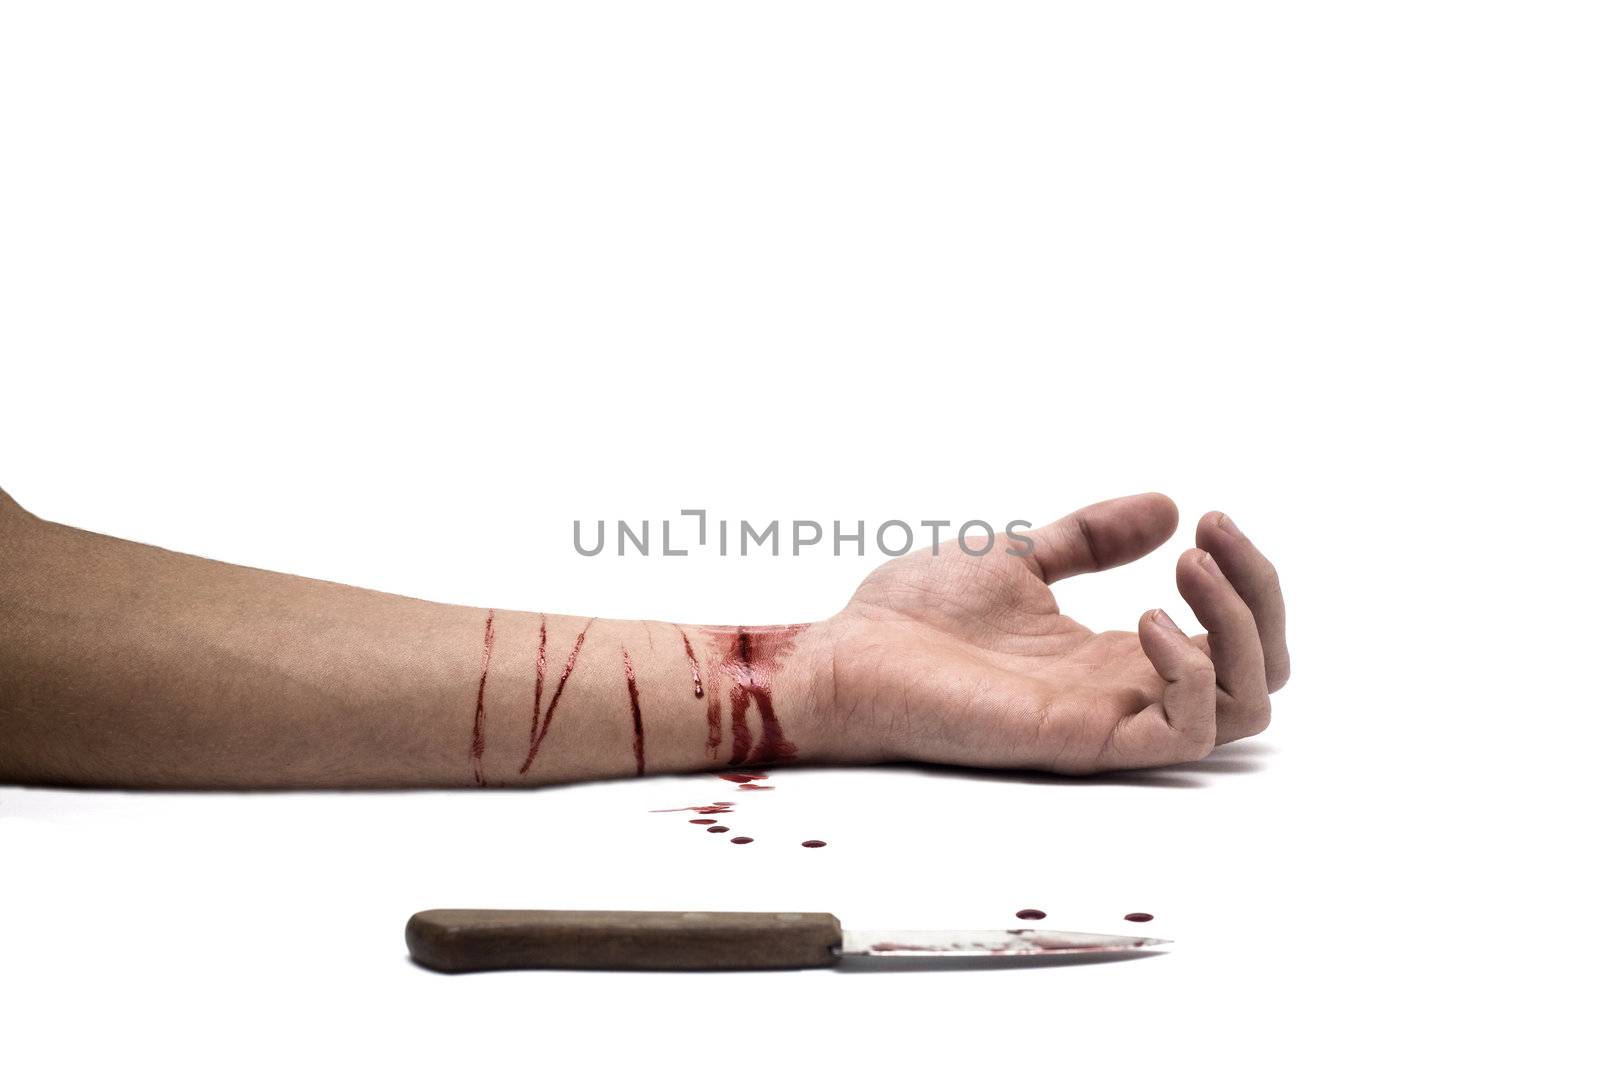 A bloody knife and a cut wrist, isolated on white. This image has innumerous uses like accidents, domestic violence, suicide, murder, hate, etc...
